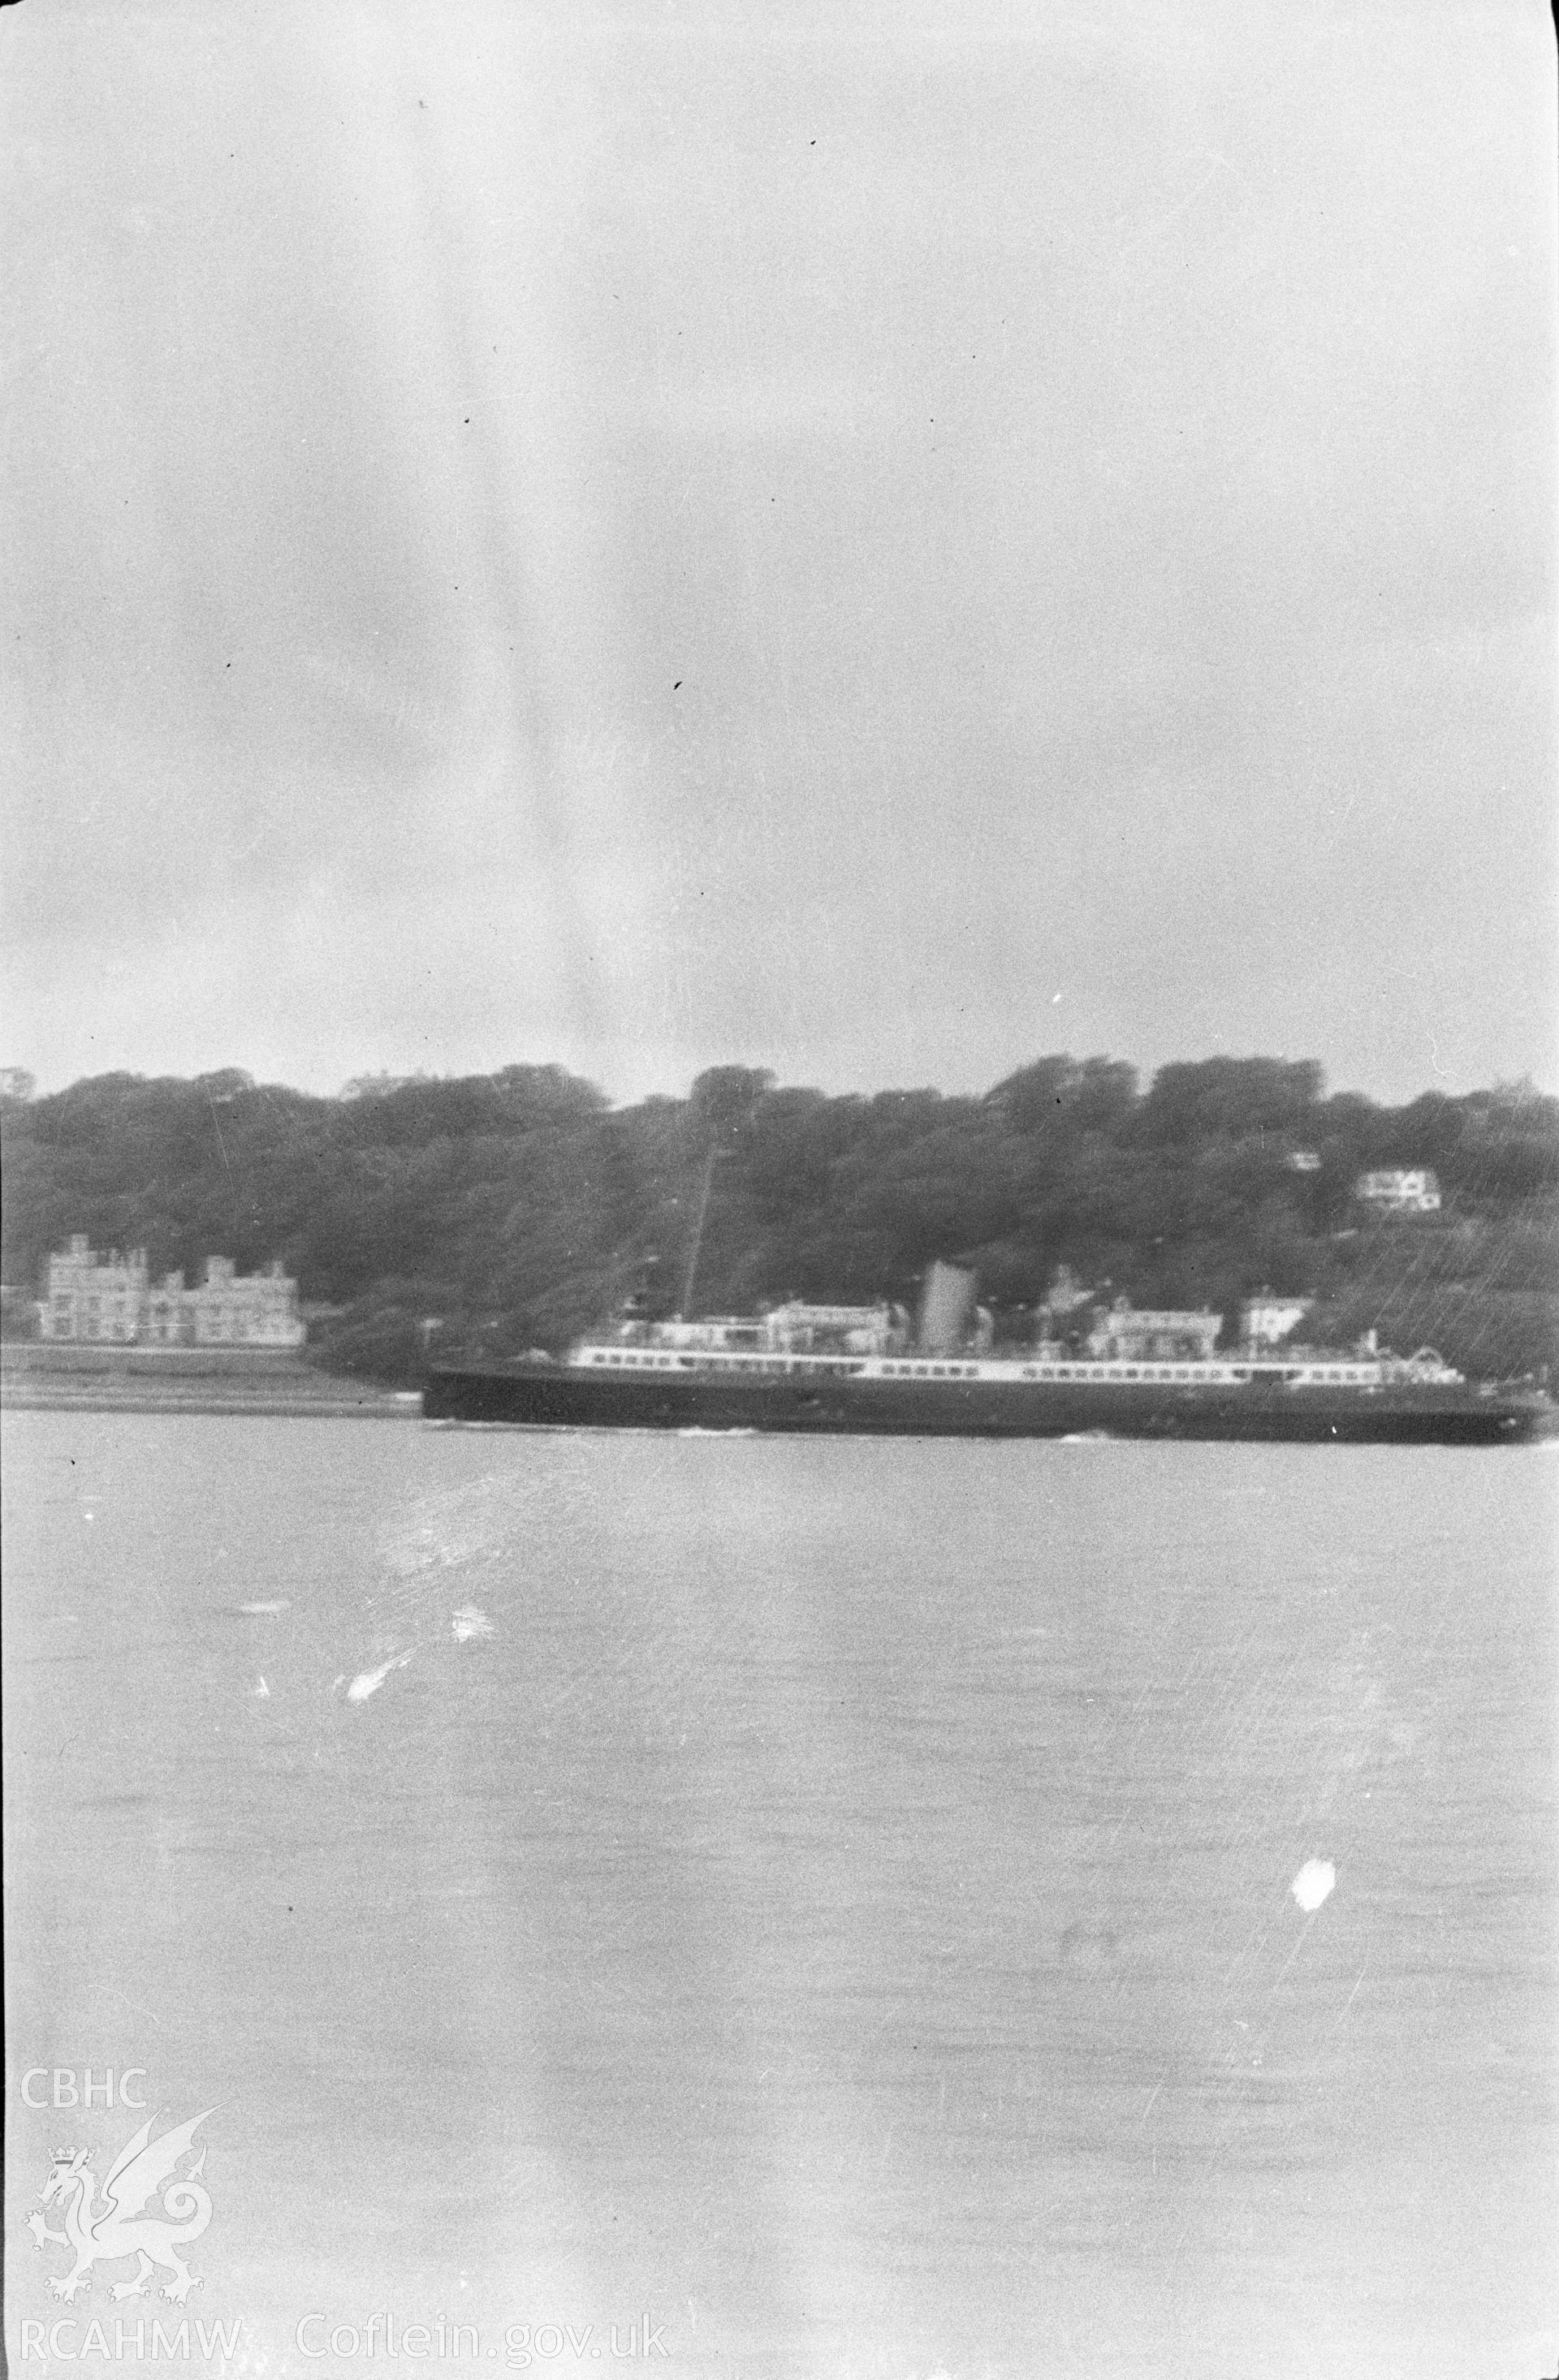 Digital copy of a nitrate negative showing an unidentified vessel off the coast of Aberystwyth, from the Peter Henley Collection.